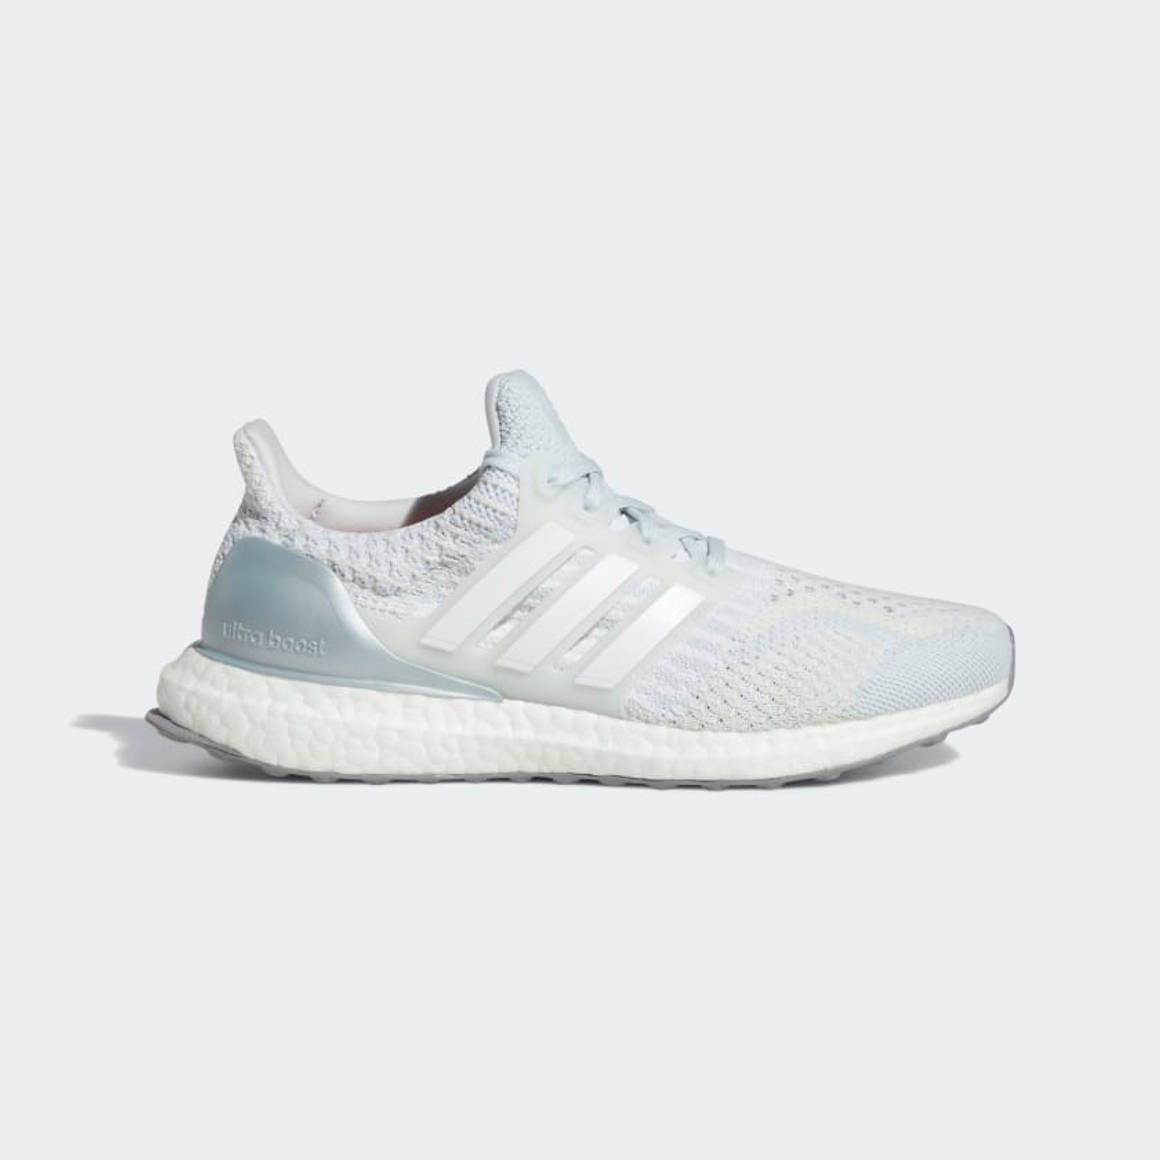 Ultraboost_5.0_DNA_Shoes_Blue_GY0314_01_standard